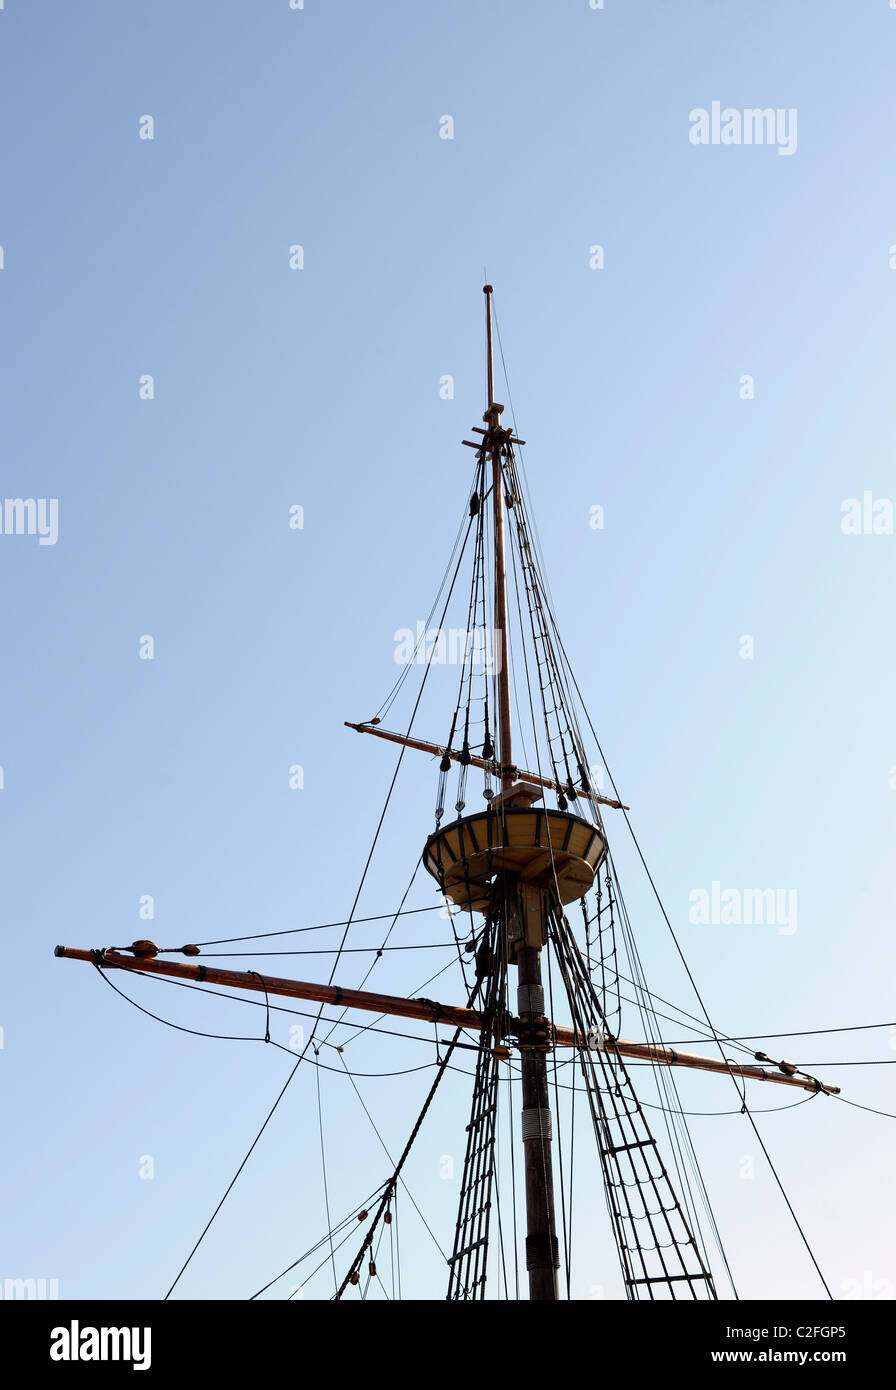 Rigging on Mayflower II, replica of the original ship that brought pilgrims to America. Stock Photo